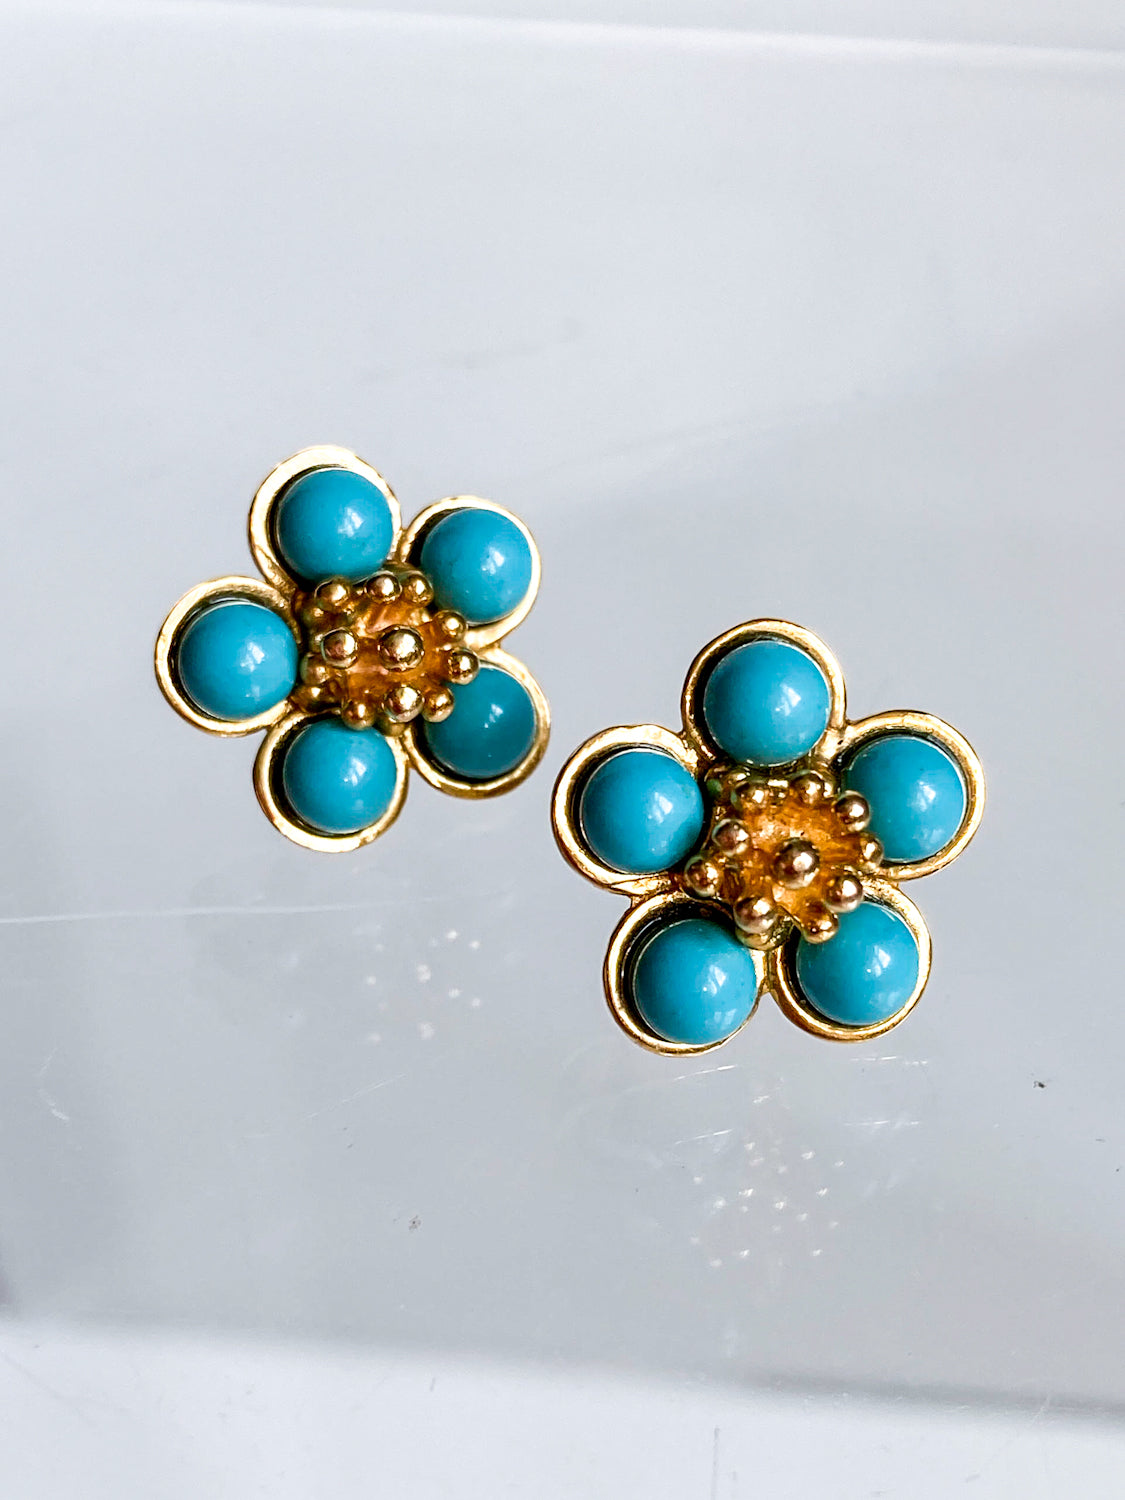 Gorgeous 14K Yellow Gold Turquoise Bead Flower Post Earrings White Background